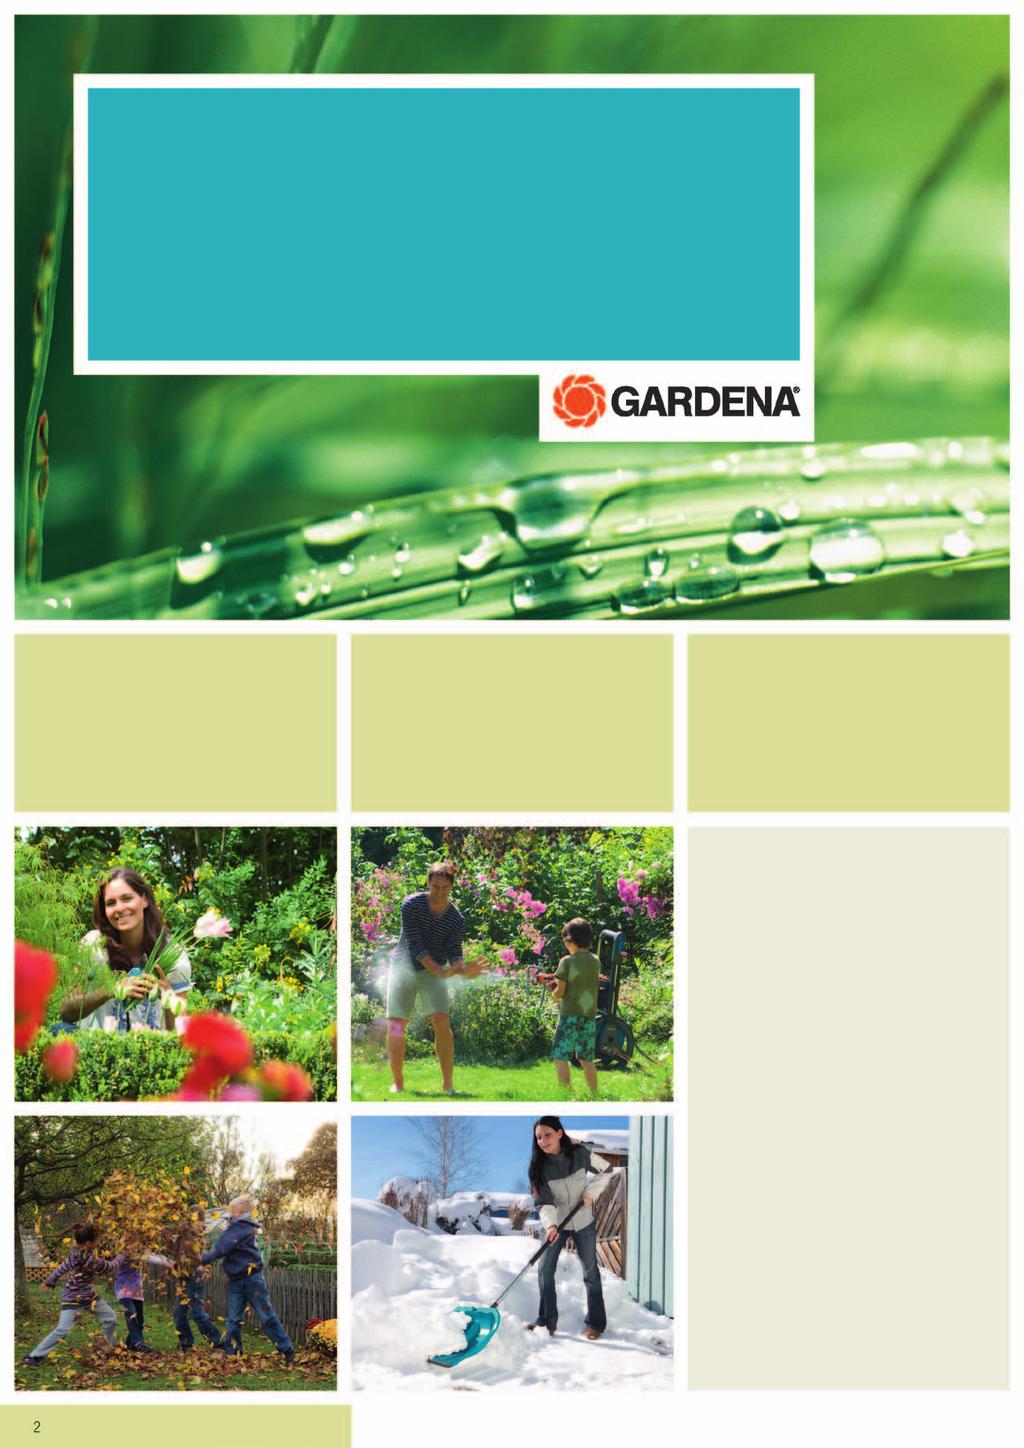 GARDENA Everything for the garden High-quality products. Beautiful gardens. Contents GARDENA offers the right products for each garden area.